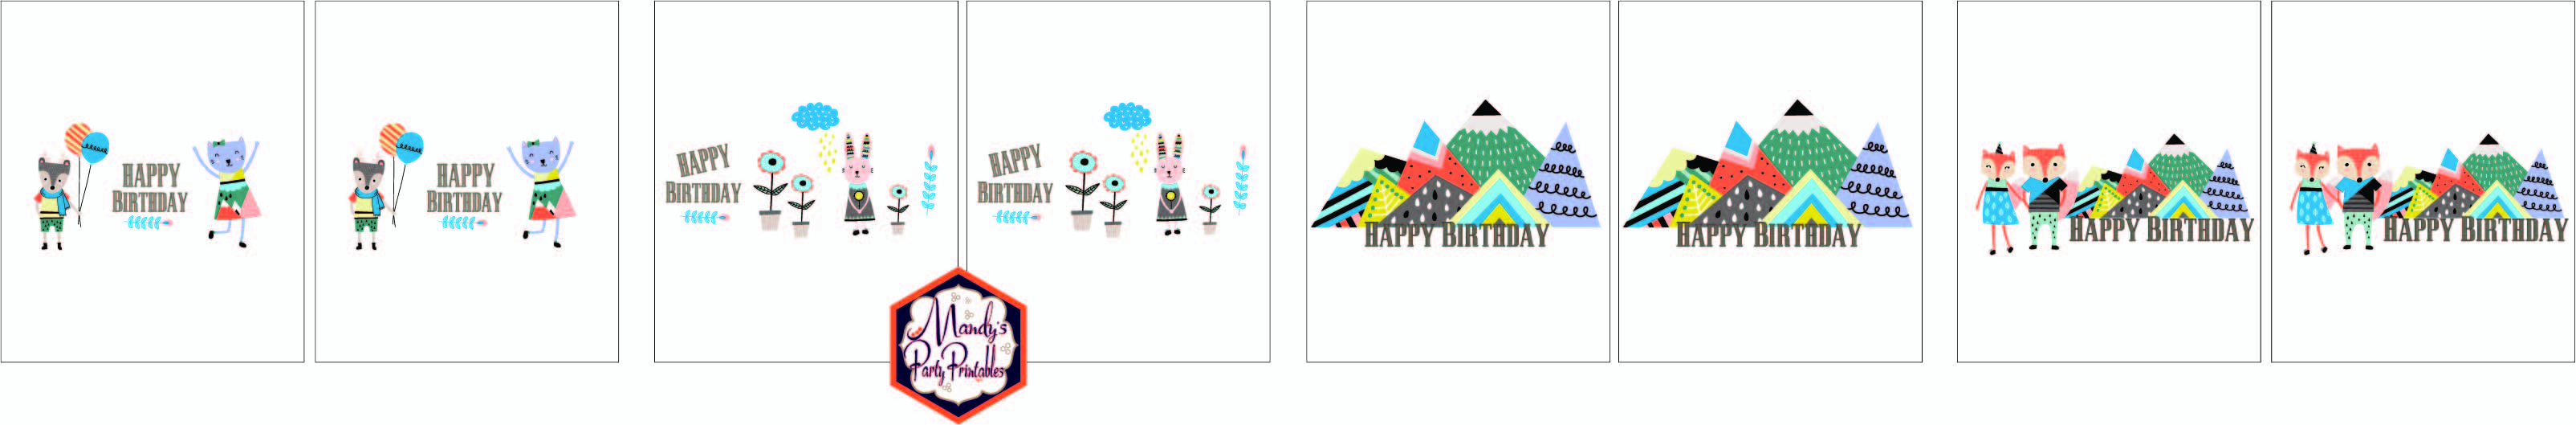 Hipster Woodland Animal Birthday Printables Candy Bar Wrappers via Mandy's Party Printables